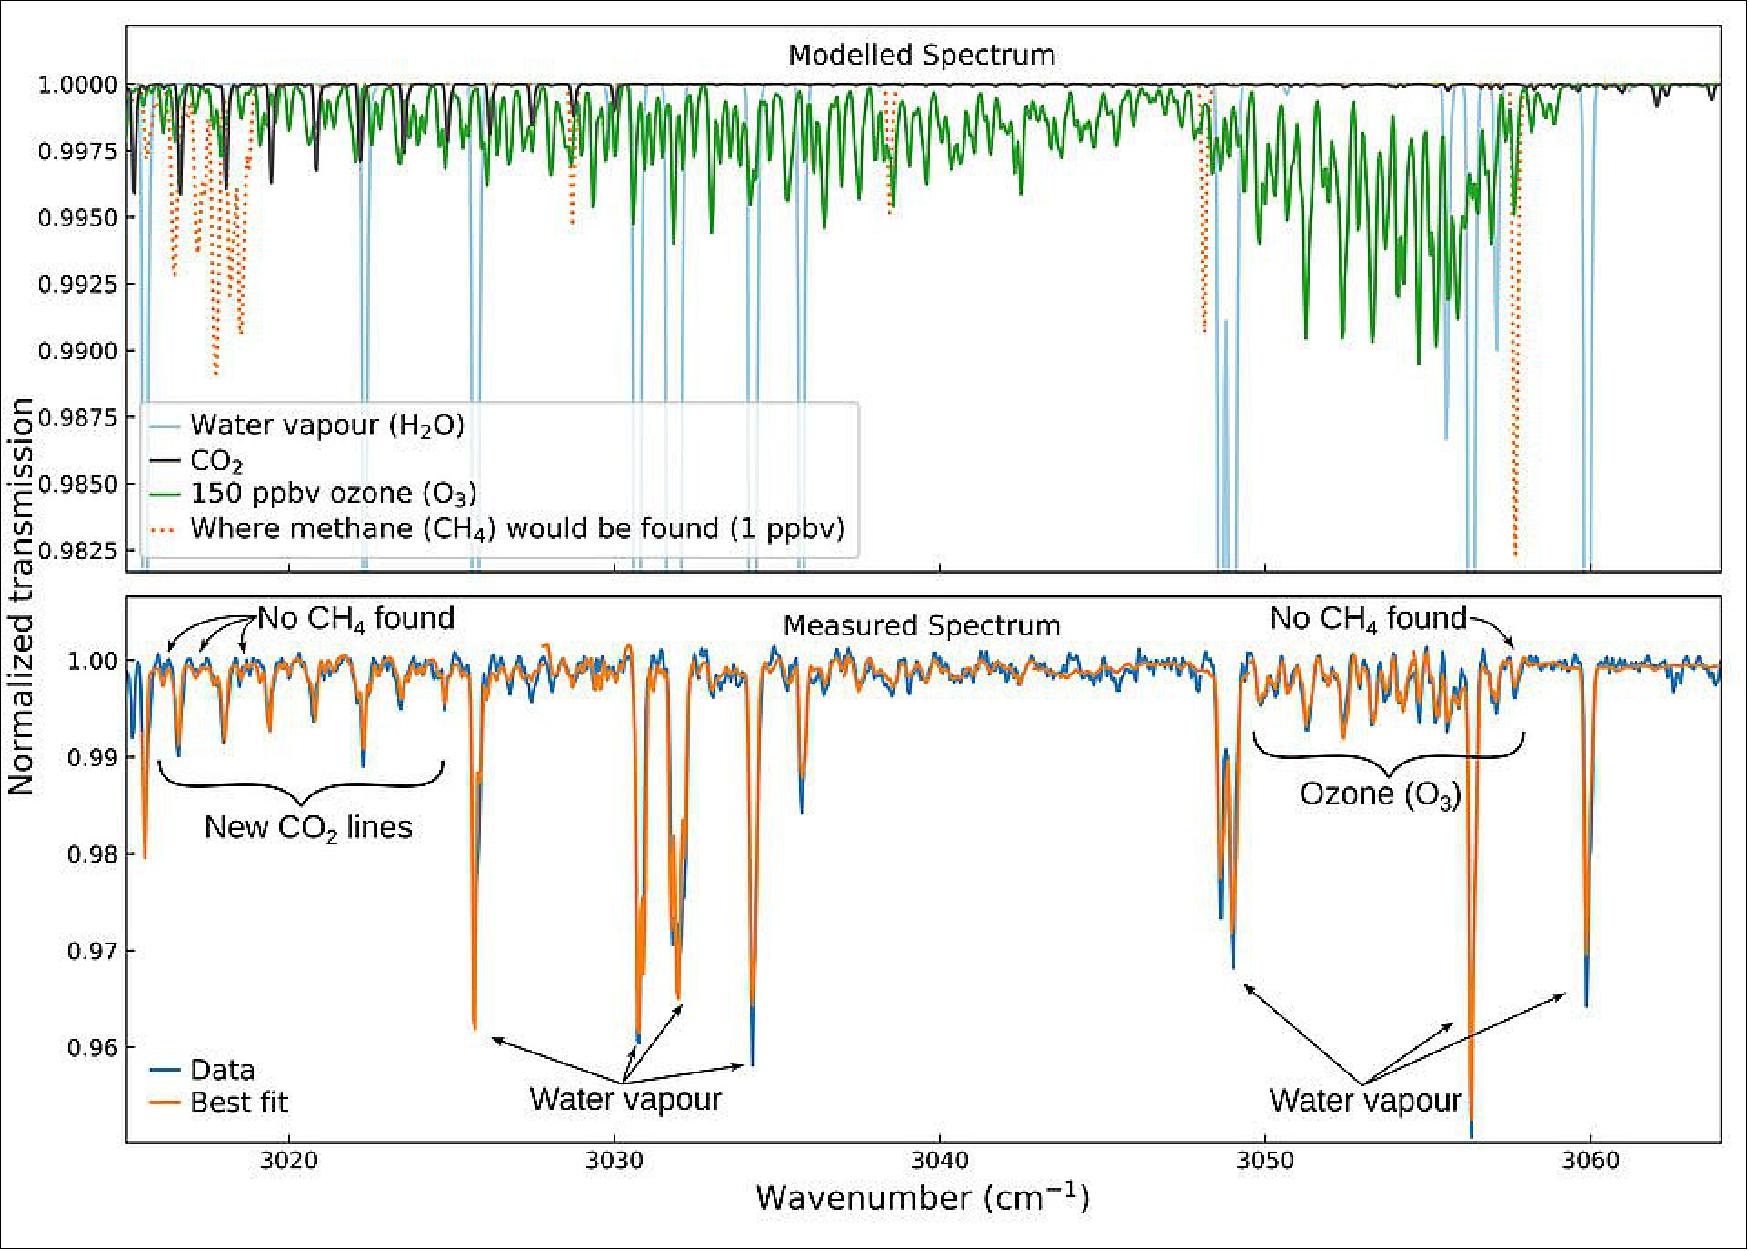 Figure 45: Spectral signatures of carbon dioxide and ozone at Mars. This graph shows an example of the measurements made by the Atmospheric Chemistry Suite (ACS) MIR instrument on ESA's ExoMars Trace Gas Orbiter (TGO), featuring the spectral signatures of carbon dioxide (CO2) and ozone (O3). The bottom panel shows the data (blue) and a best-fit model (orange). The top panel shows the modelled contributions from a variety of different gases for this spectral range. The deepest lines come from water vapor (light blue). The strongest O3 feature (green) is on the right, and distinct CO2 lines (grey) appear on the left. The locations of strong methane features (orange) are also shown in the modelled contributions, though methane is not observed in the TGO data (image credit: K. Olsen et al. (2020))